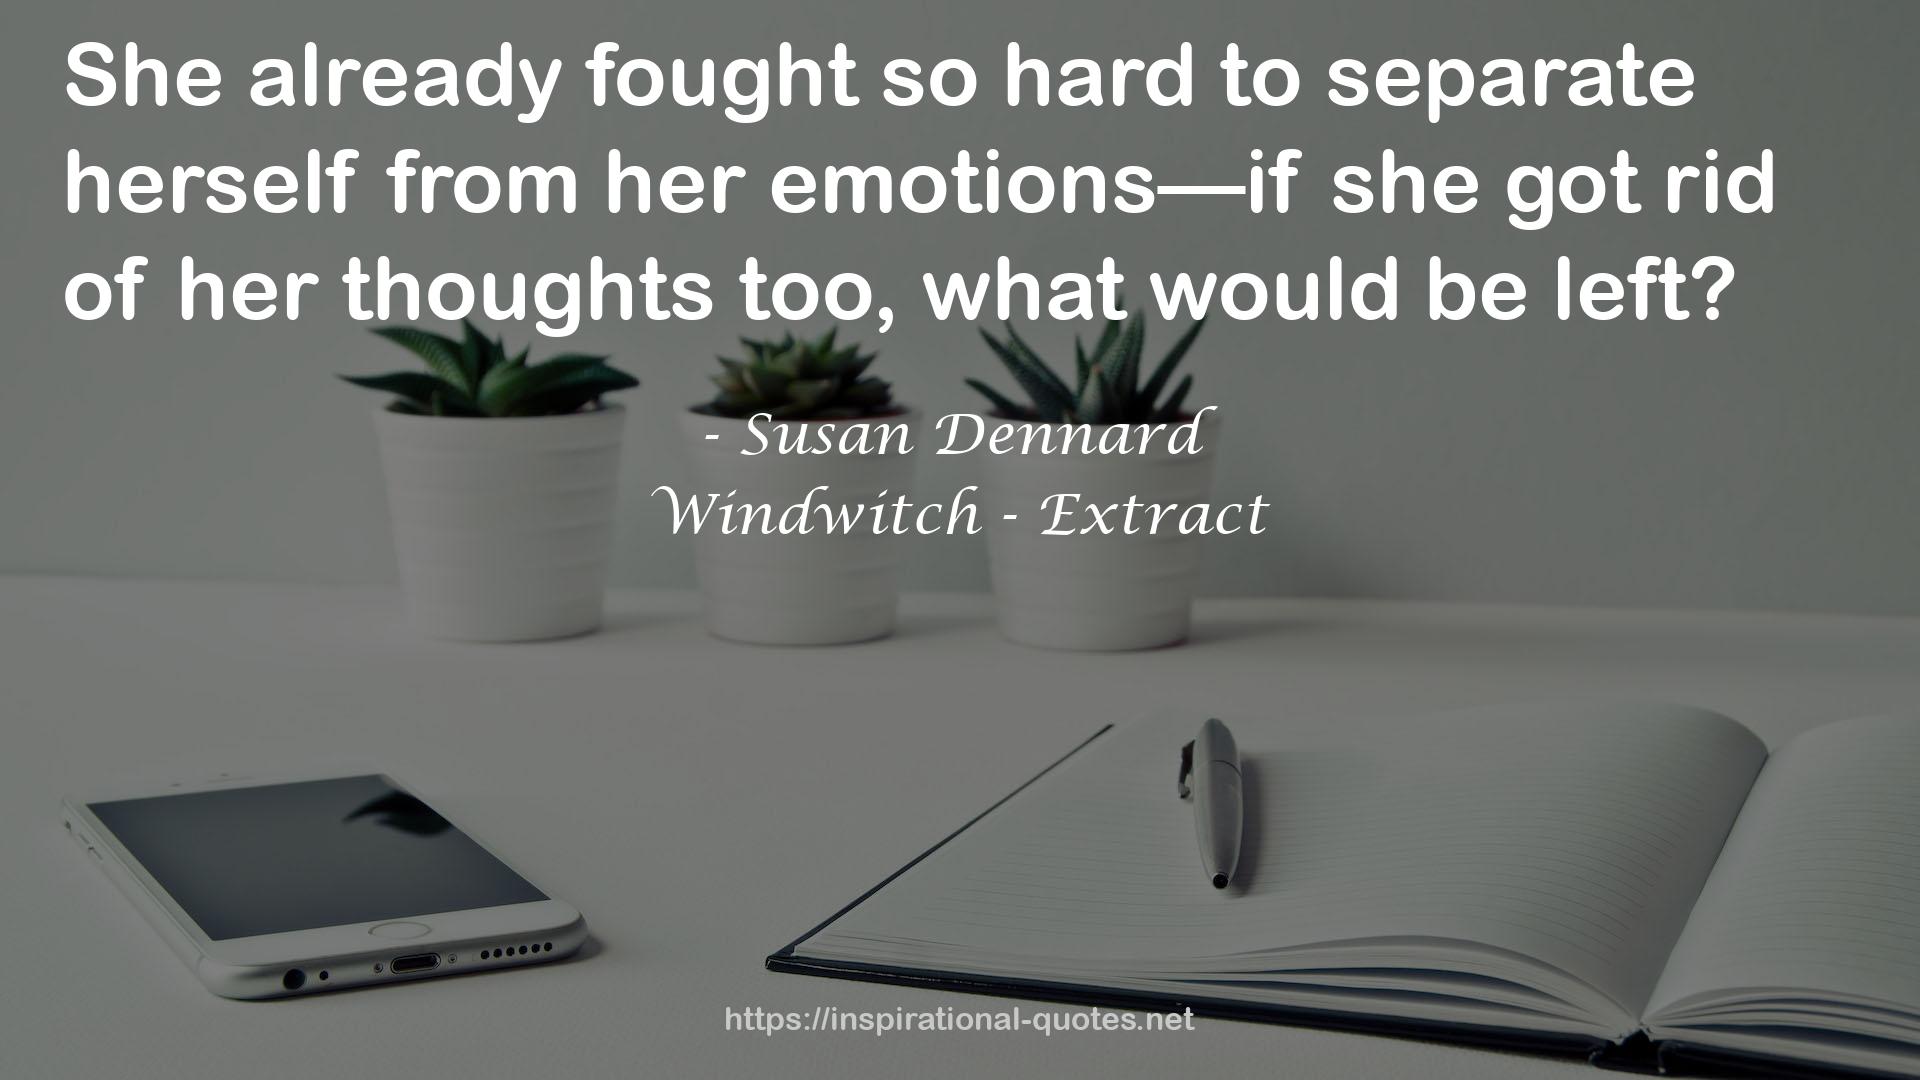 Windwitch - Extract QUOTES